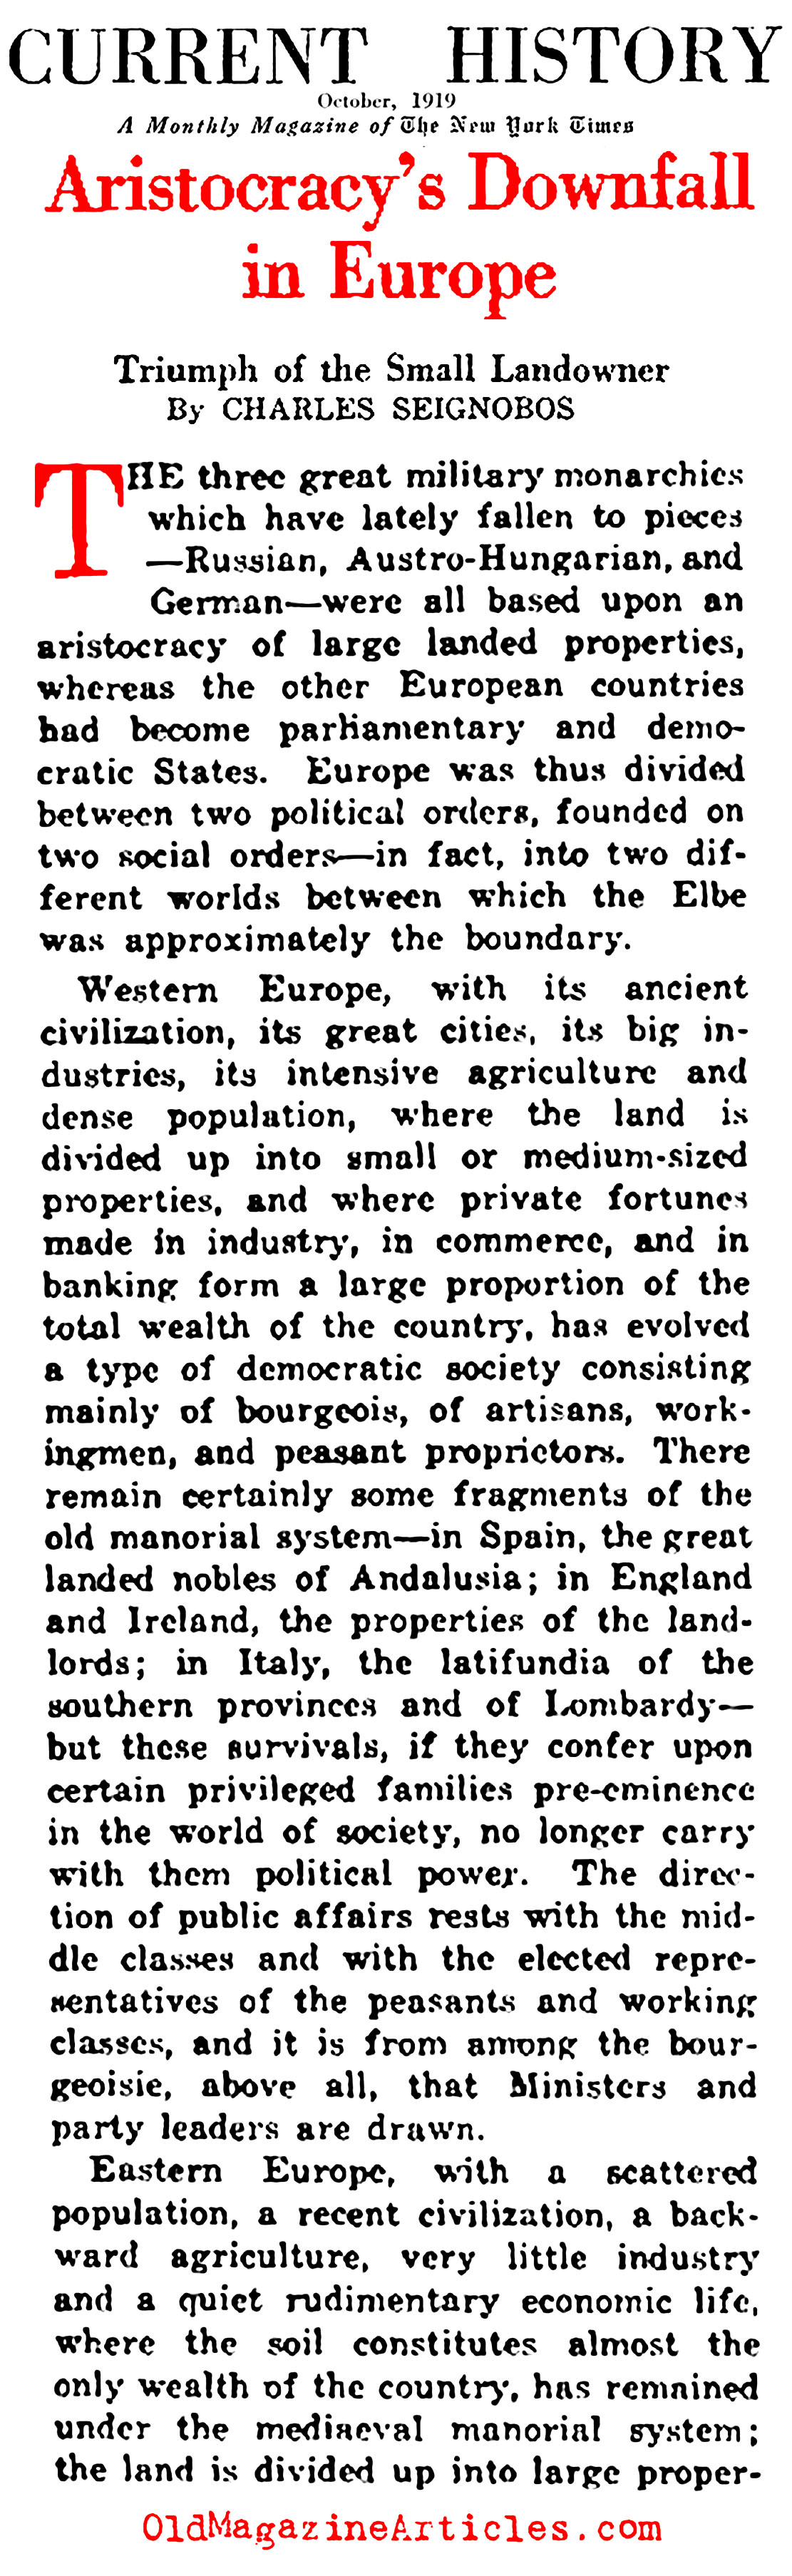 The Collapse of the European Aristocracy (NY Times, 1919)